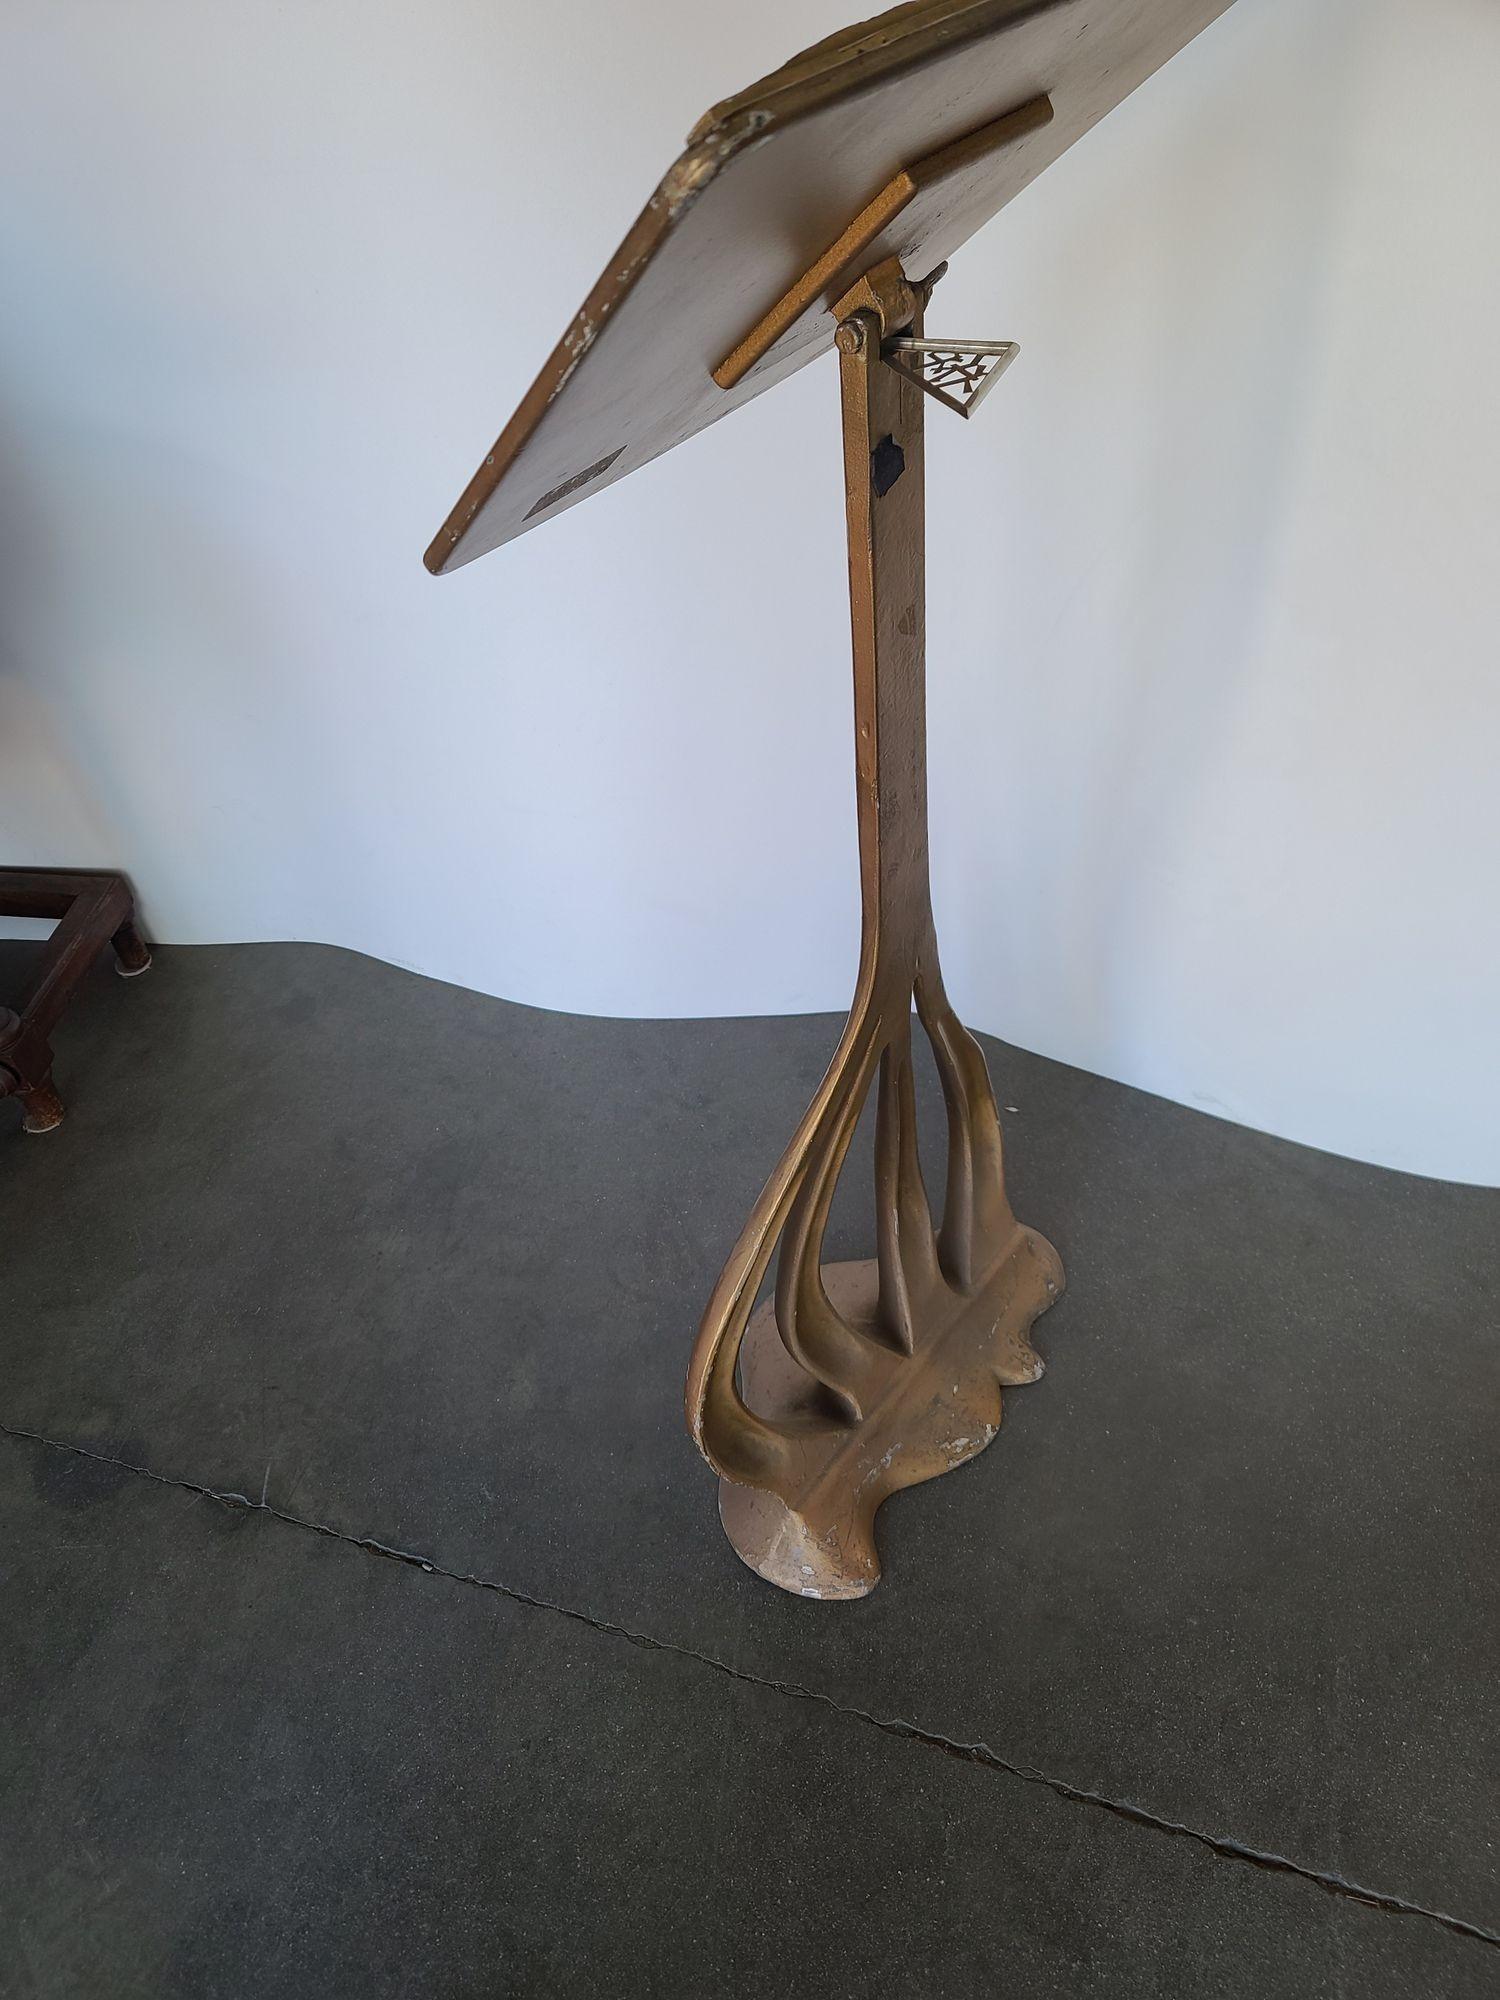 Large Music Stand 1940s Art Deco with Biomorphic sculptural cast Aluminum Base. Perfect addition to any musician or designer's space.